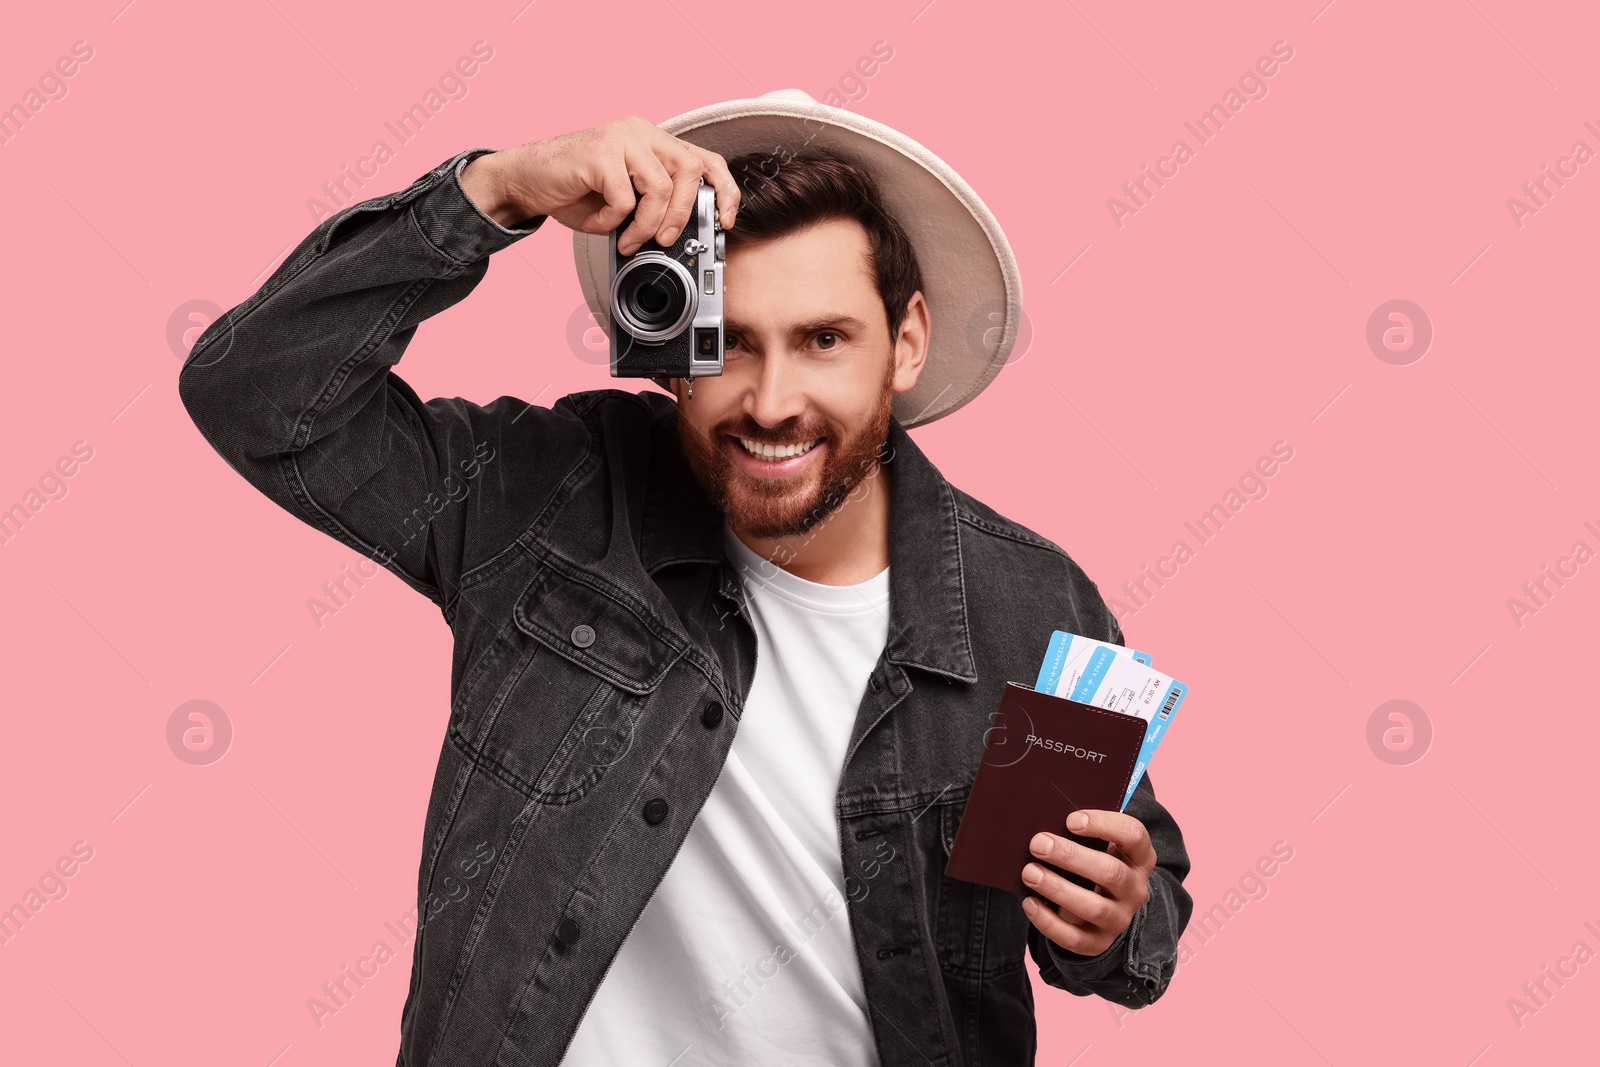 Photo of Smiling man with passport, tickets and camera on pink background